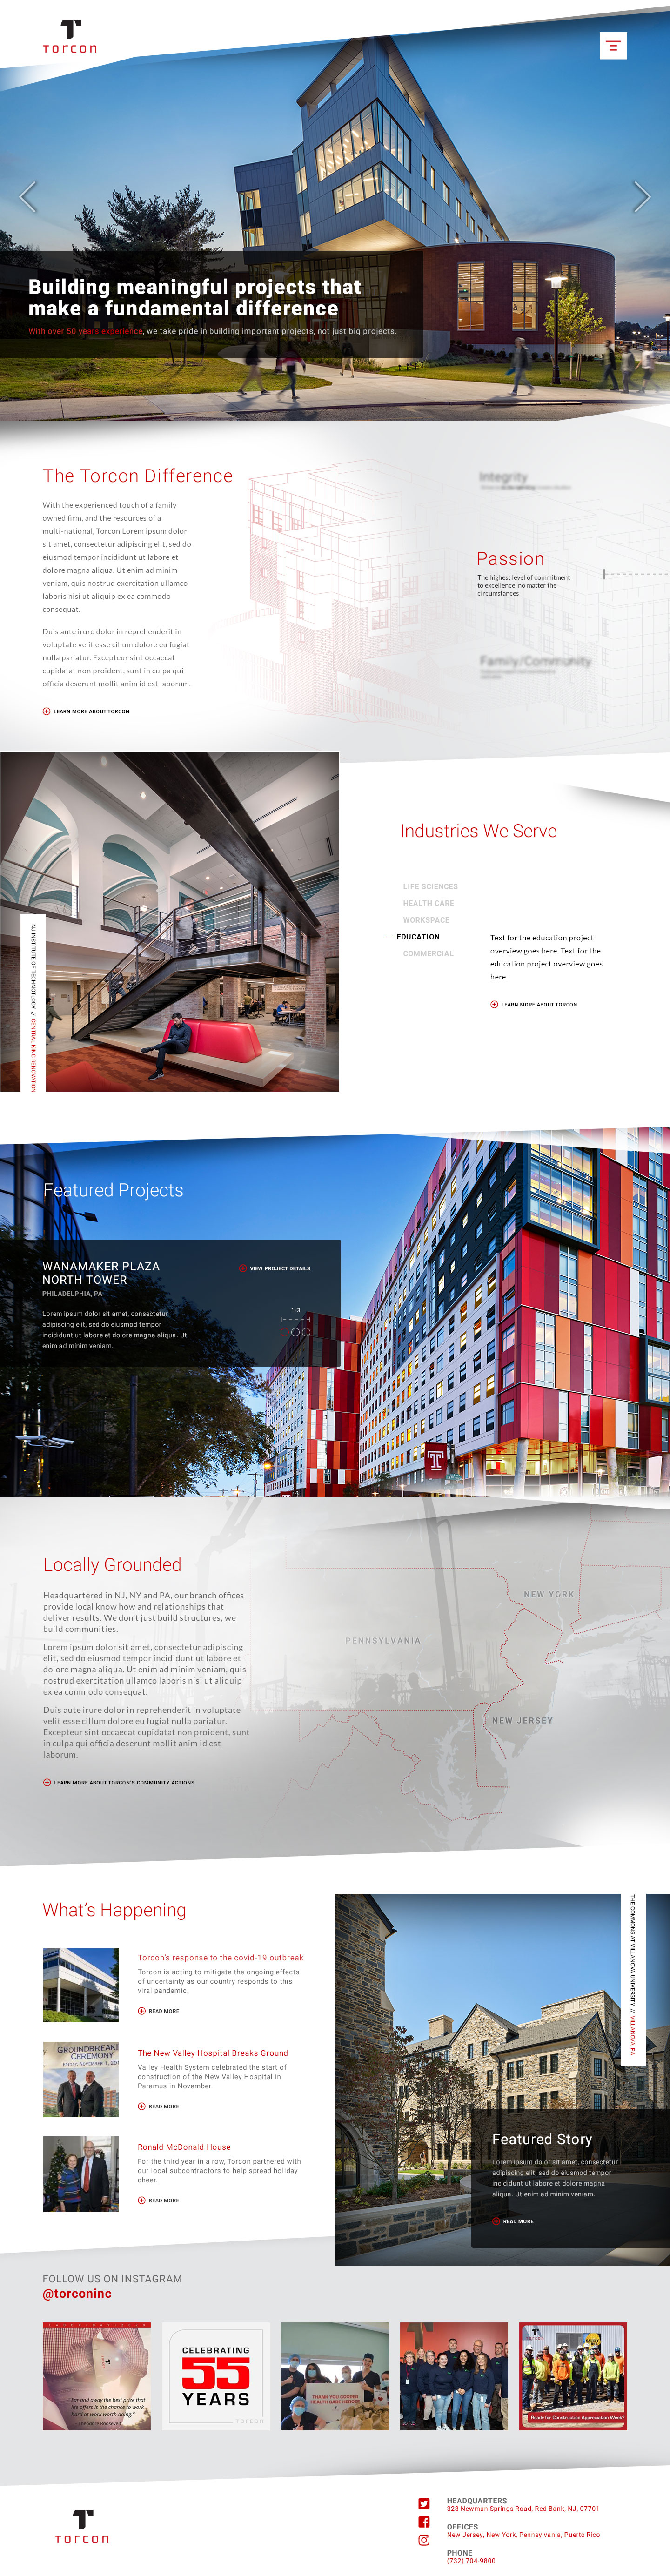 Website design and website development for Torcon - homepage view.